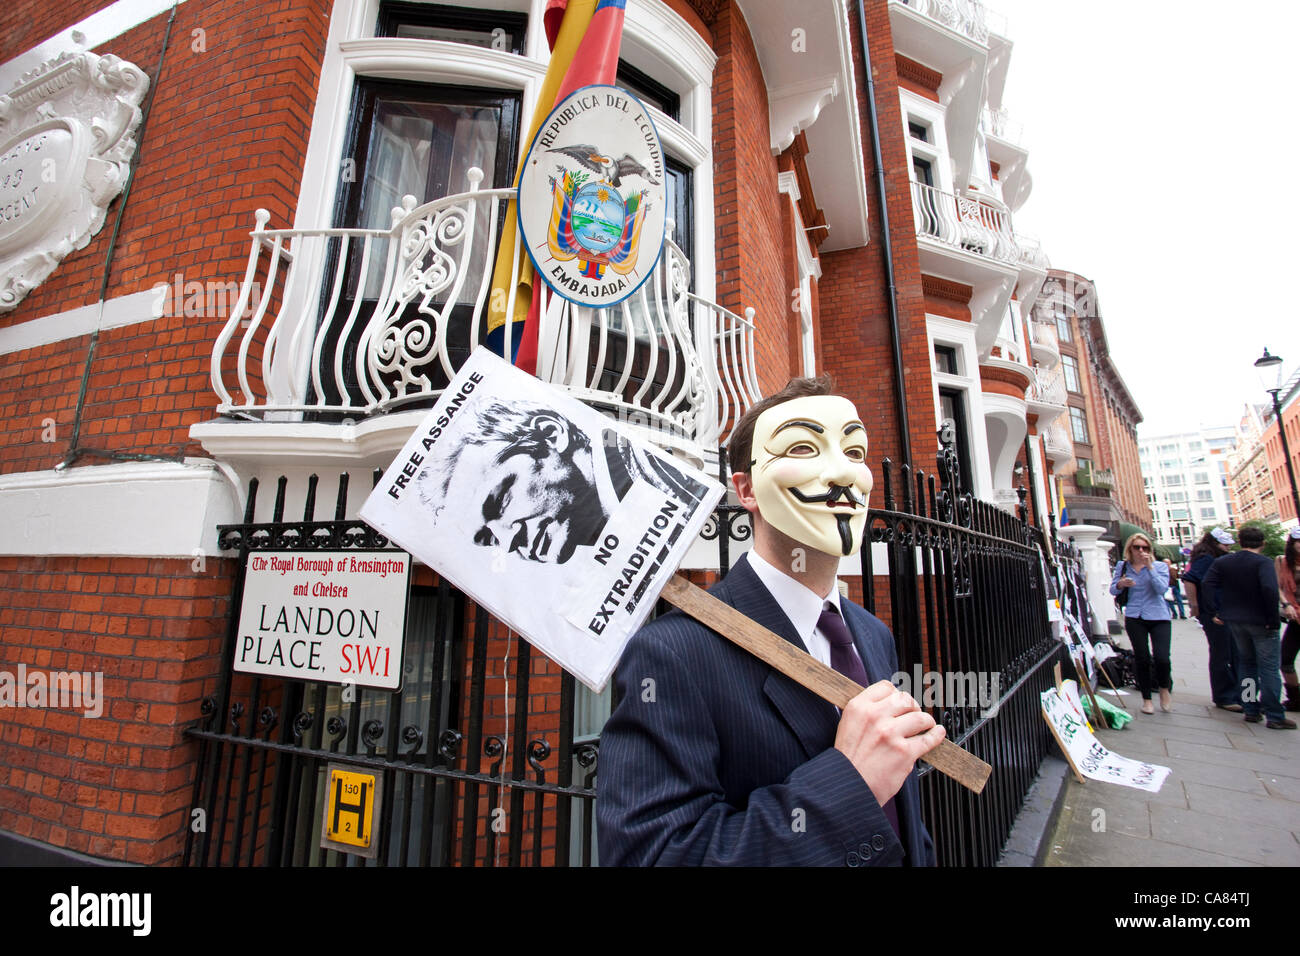 London, UK. 25 June, 2012. Julian Assange. Ecuador Embassy, Hans Cresent, London, UK Protesters outside the Ecuador Embassy in London, as the asylum bid by Wikileaks founder Julian Assange continues and the Ecuadorean ambassador in London flies into Ecuador for talks with President Correa. Stock Photo